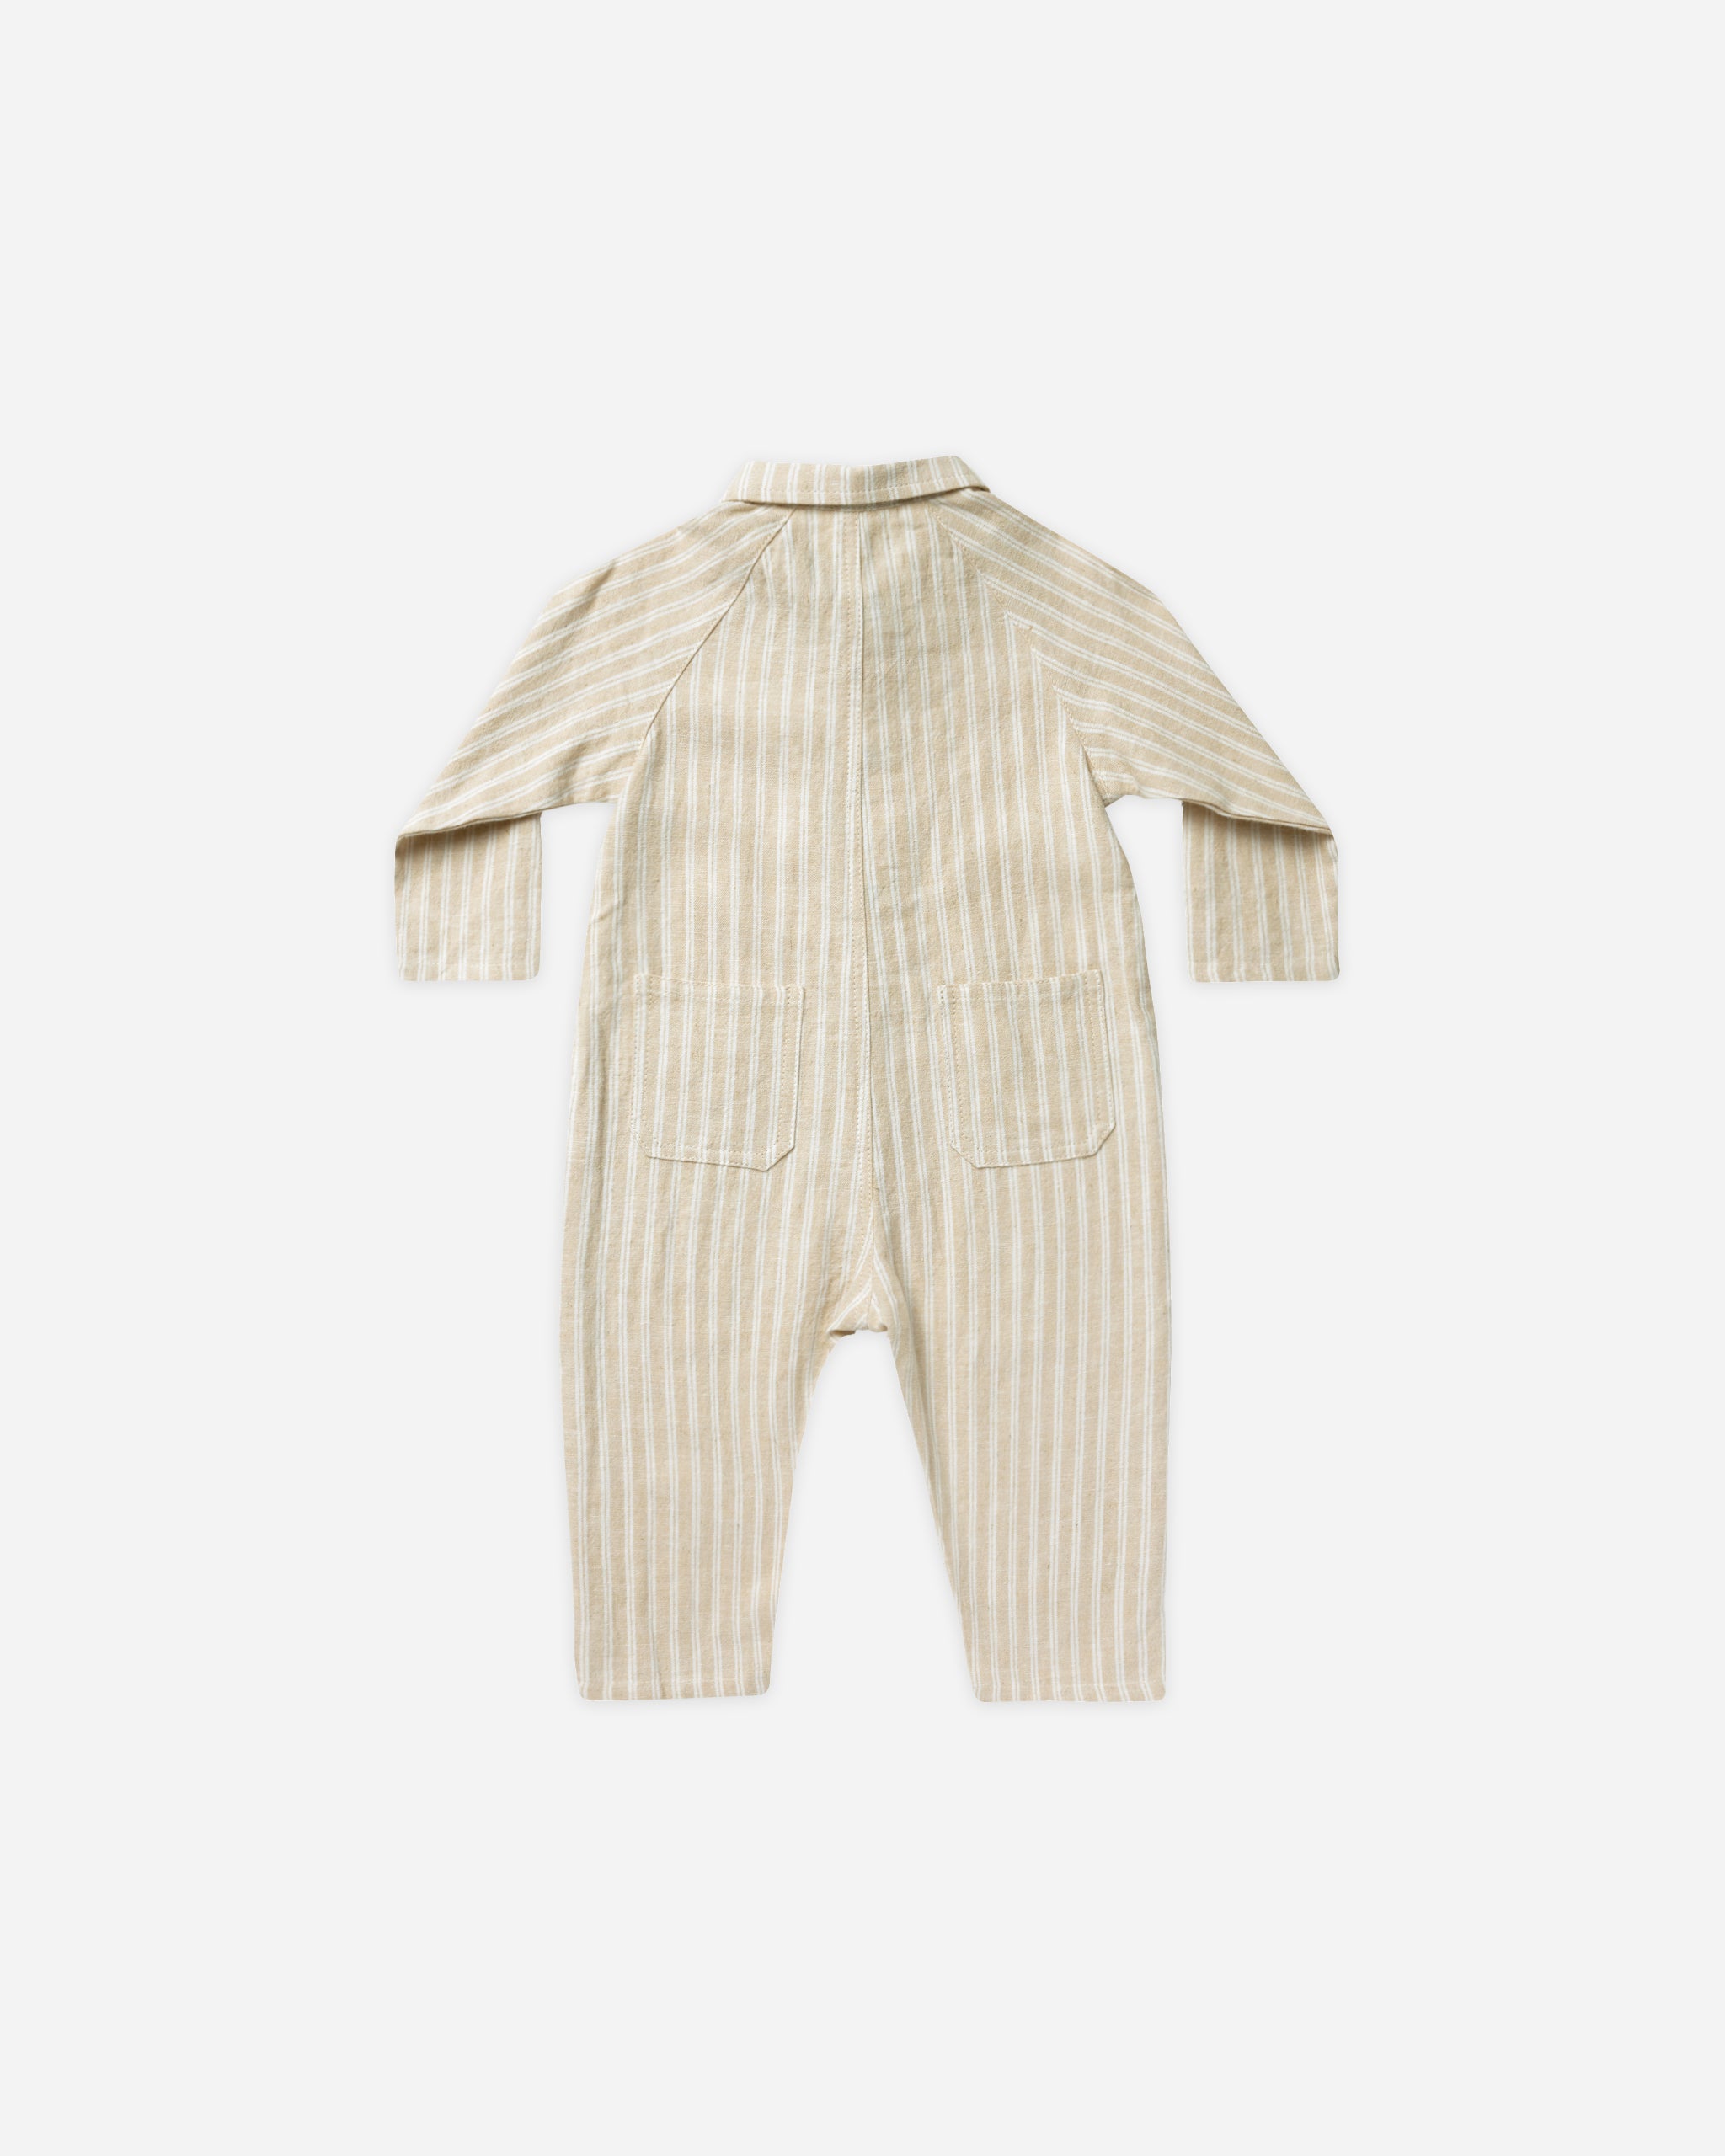 Collared Baby Jumpsuit || Champagne Stripe - Rylee + Cru | Kids Clothes | Trendy Baby Clothes | Modern Infant Outfits |